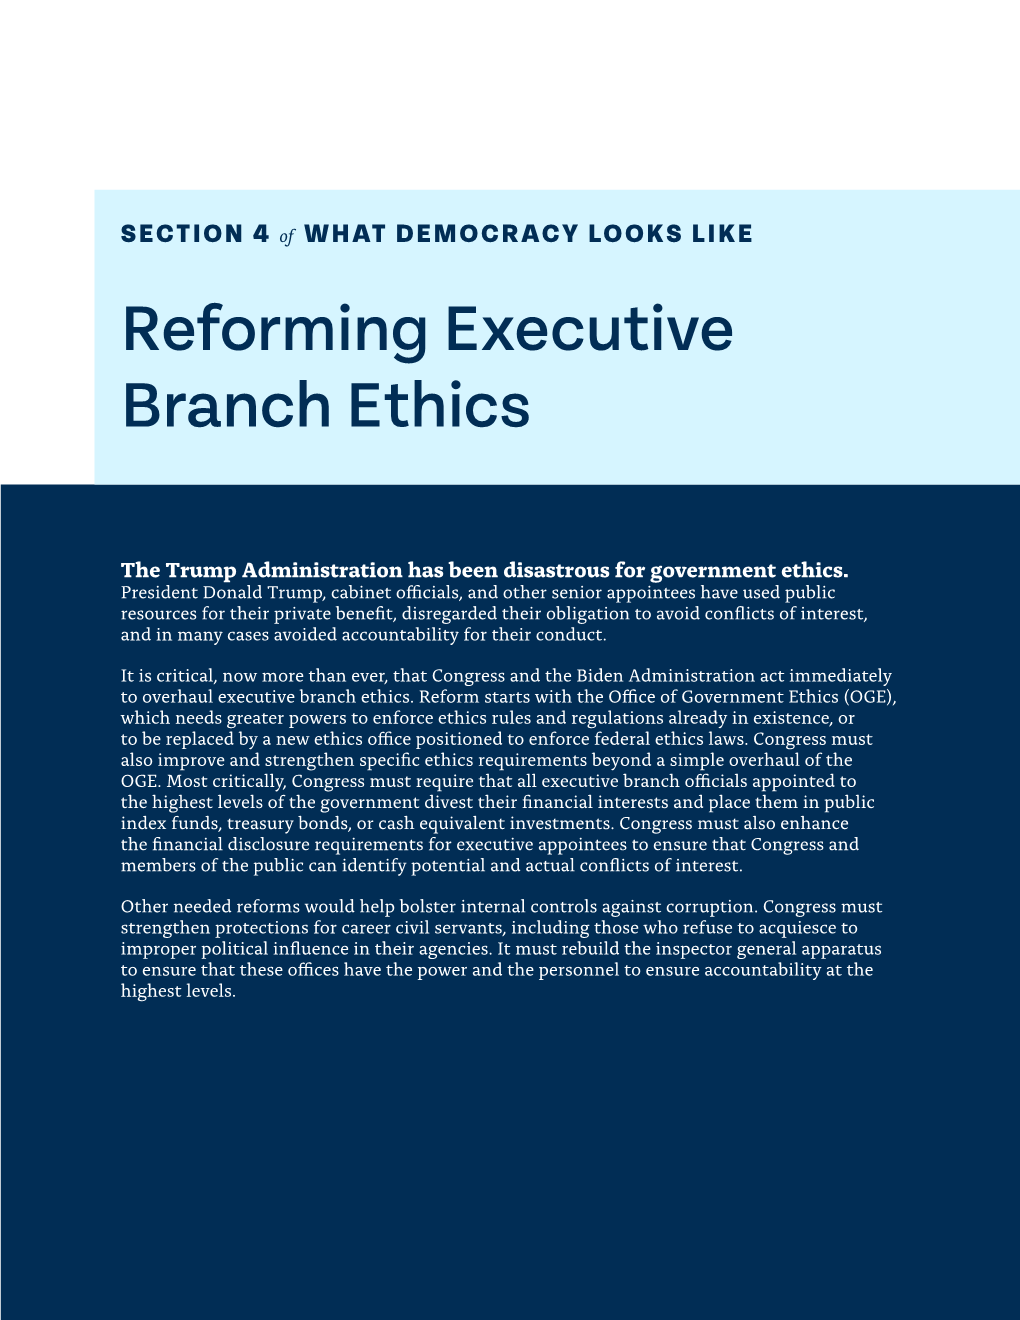 Reforming Executive Branch Ethics